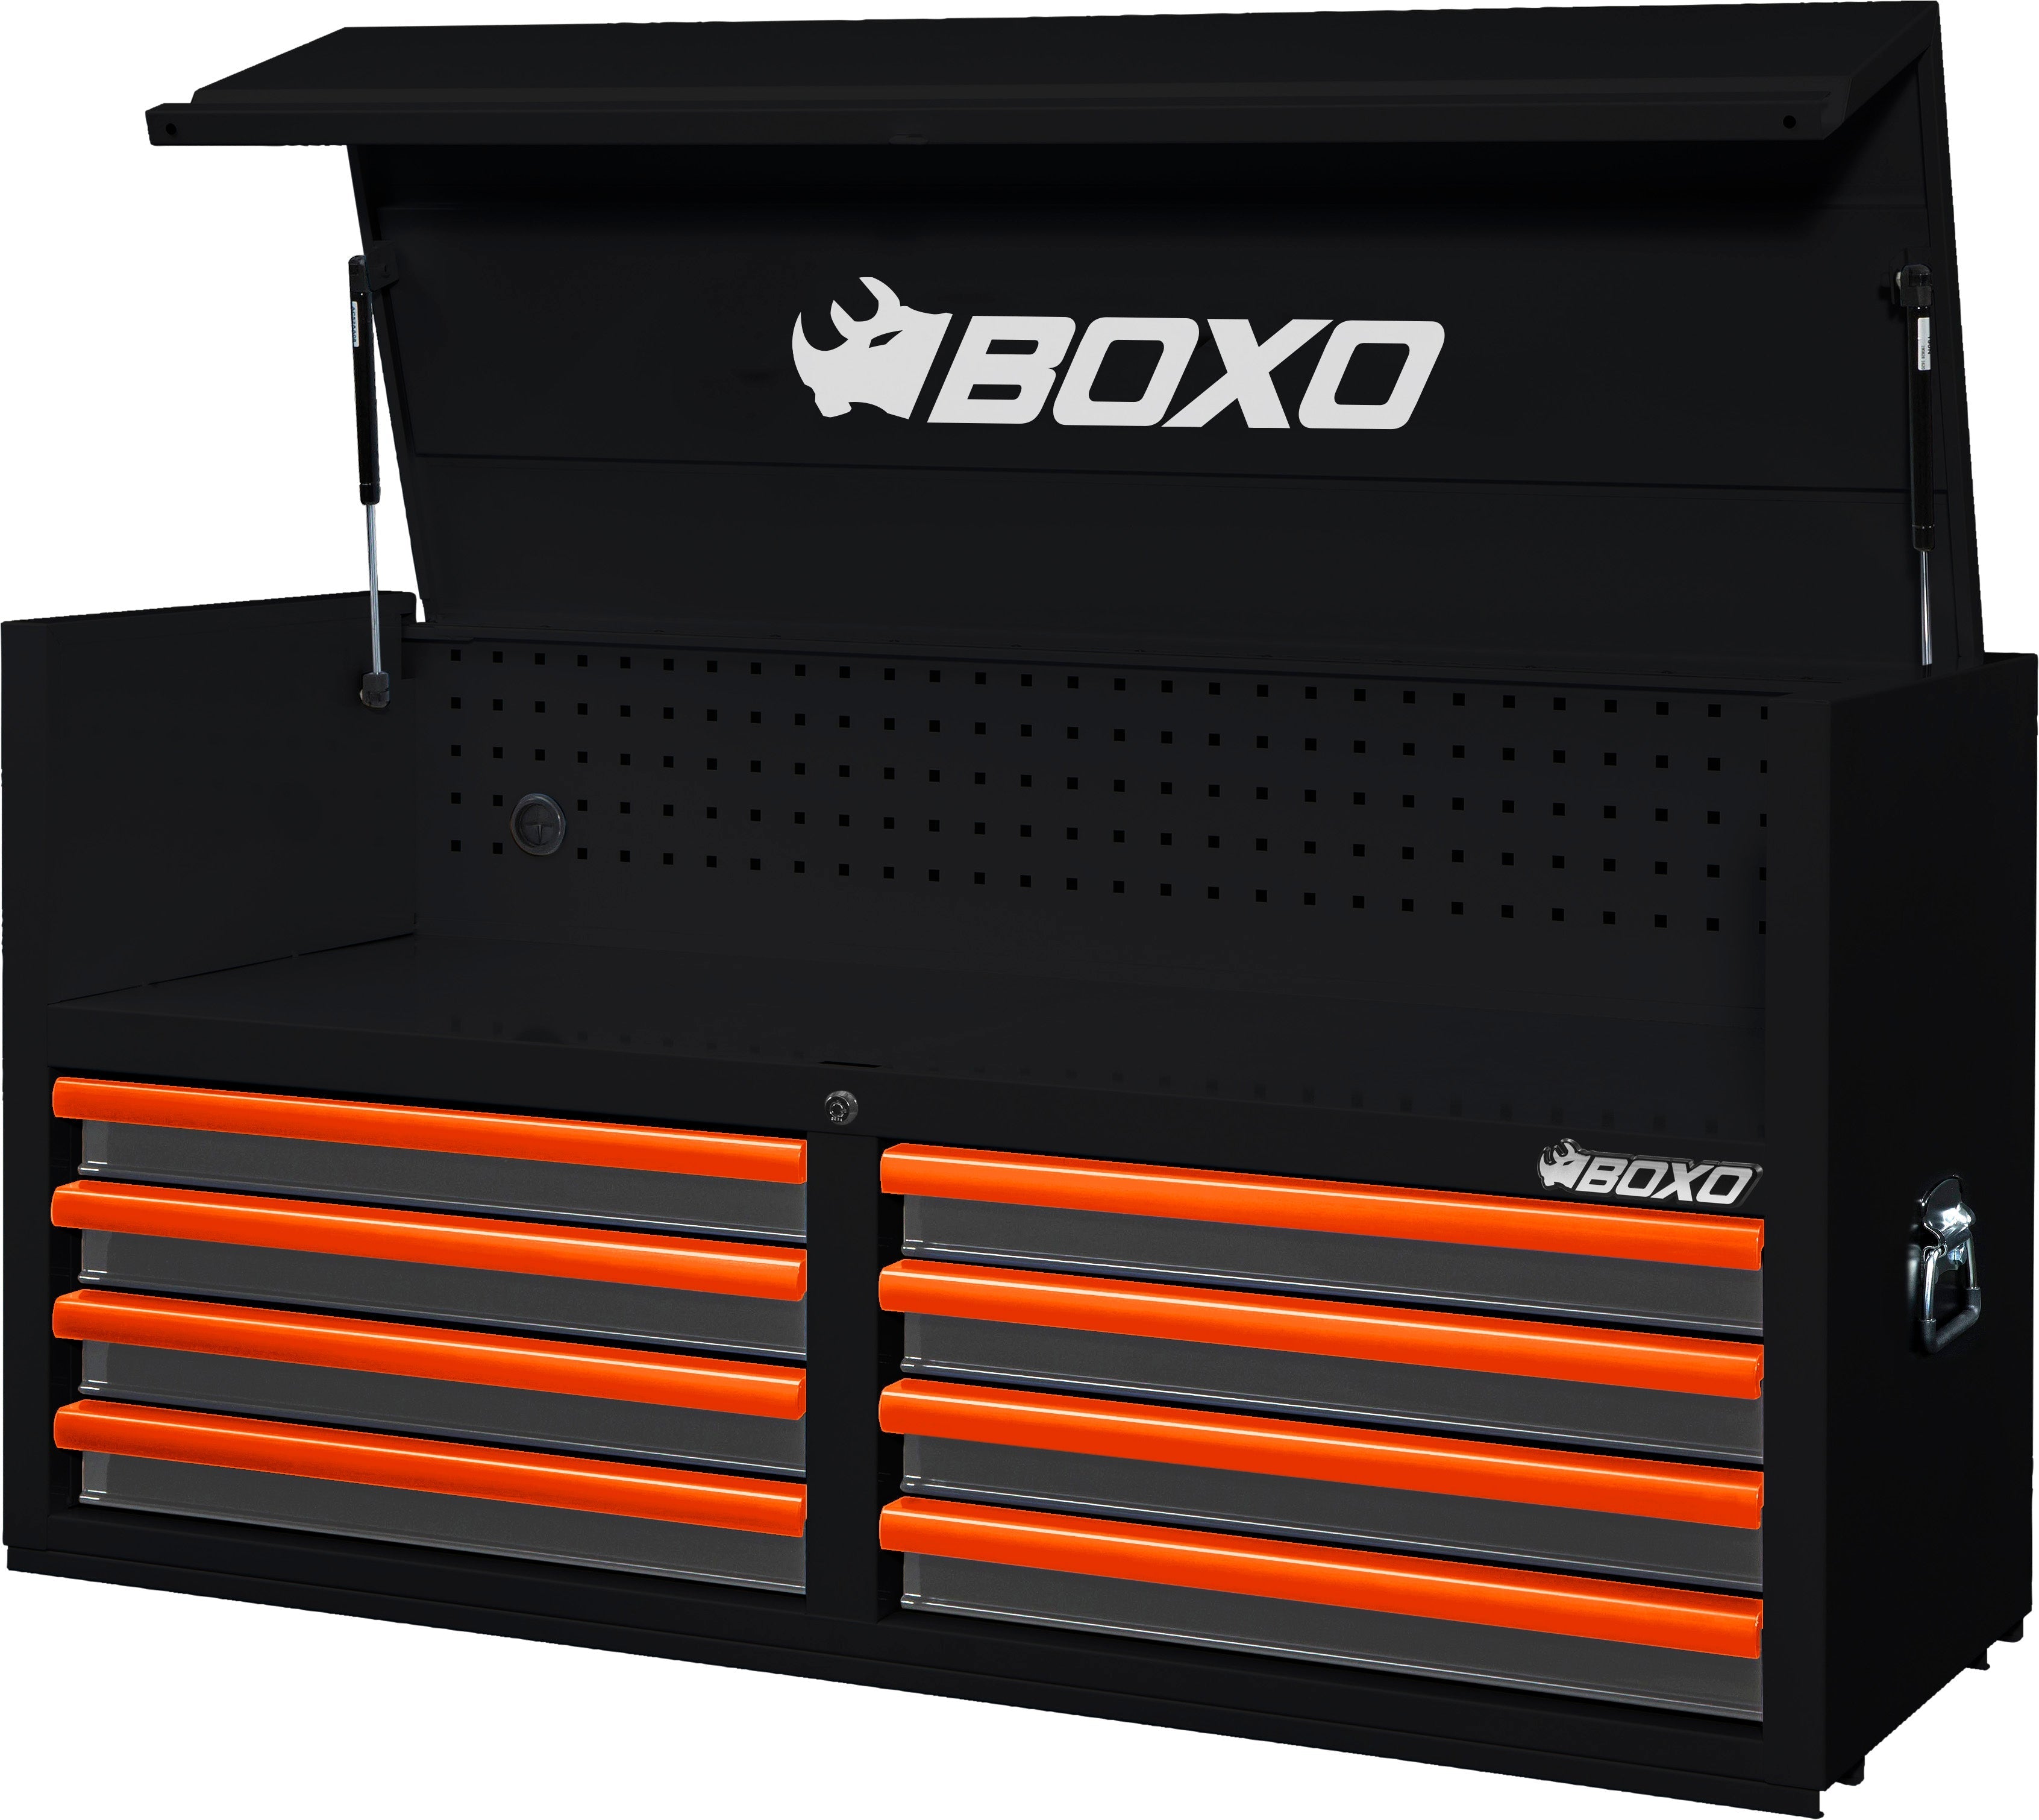 BOXO 53" 8 Drawer Top Box with Drawer Trim Pack - Black Body & Trim Colour Options